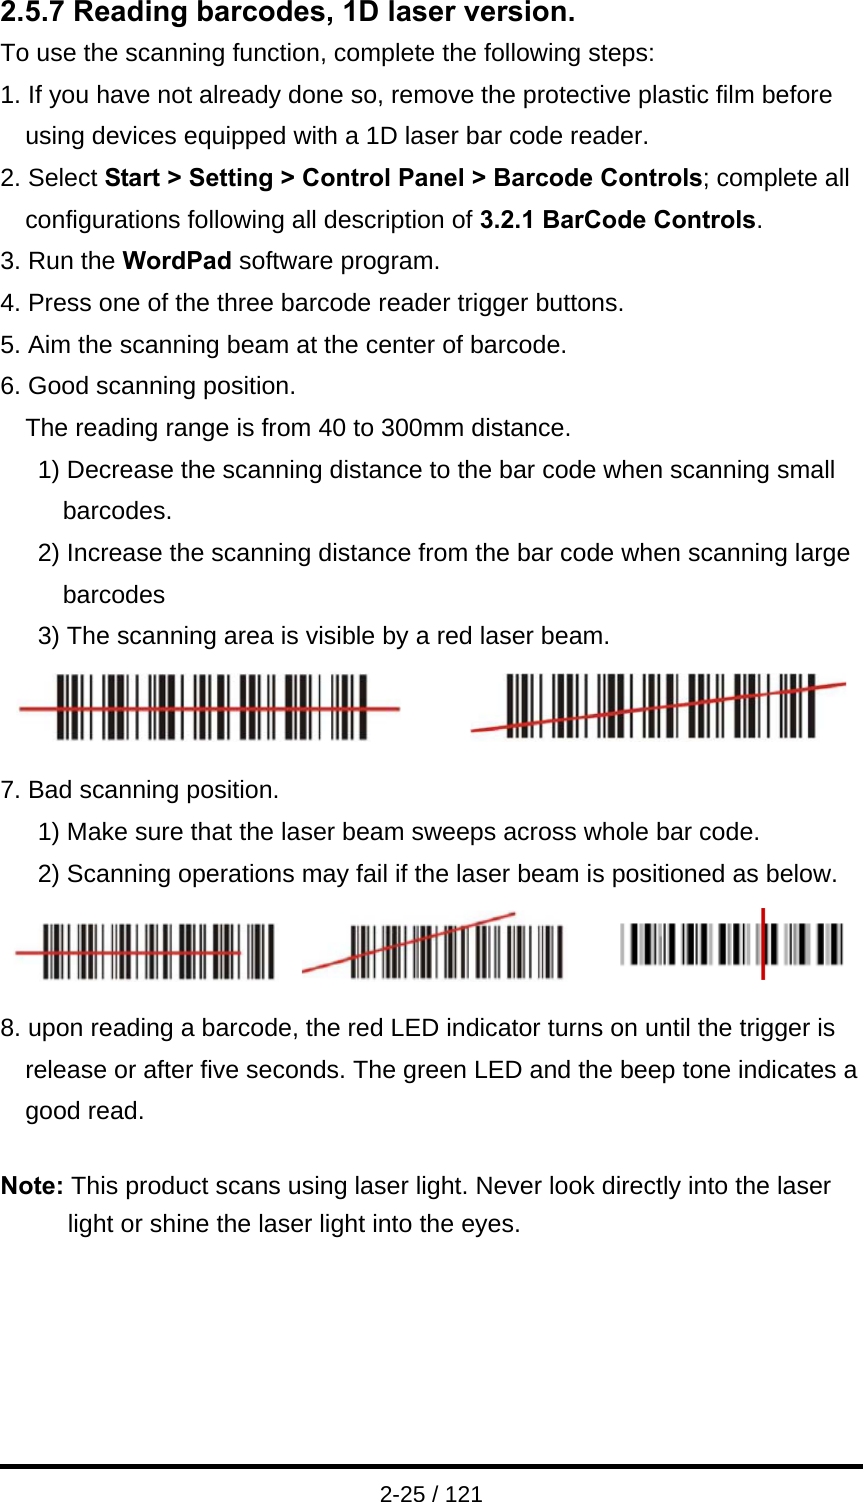  2-25 / 121 2.5.7 Reading barcodes, 1D laser version. To use the scanning function, complete the following steps: 1. If you have not already done so, remove the protective plastic film before using devices equipped with a 1D laser bar code reader. 2. Select Start &gt; Setting &gt; Control Panel &gt; Barcode Controls; complete all configurations following all description of 3.2.1 BarCode Controls. 3. Run the WordPad software program. 4. Press one of the three barcode reader trigger buttons. 5. Aim the scanning beam at the center of barcode. 6. Good scanning position. The reading range is from 40 to 300mm distance. 1) Decrease the scanning distance to the bar code when scanning small barcodes. 2) Increase the scanning distance from the bar code when scanning large barcodes 3) The scanning area is visible by a red laser beam.         7. Bad scanning position. 1) Make sure that the laser beam sweeps across whole bar code. 2) Scanning operations may fail if the laser beam is positioned as below.          8. upon reading a barcode, the red LED indicator turns on until the trigger is release or after five seconds. The green LED and the beep tone indicates a good read.  Note: This product scans using laser light. Never look directly into the laser light or shine the laser light into the eyes.      